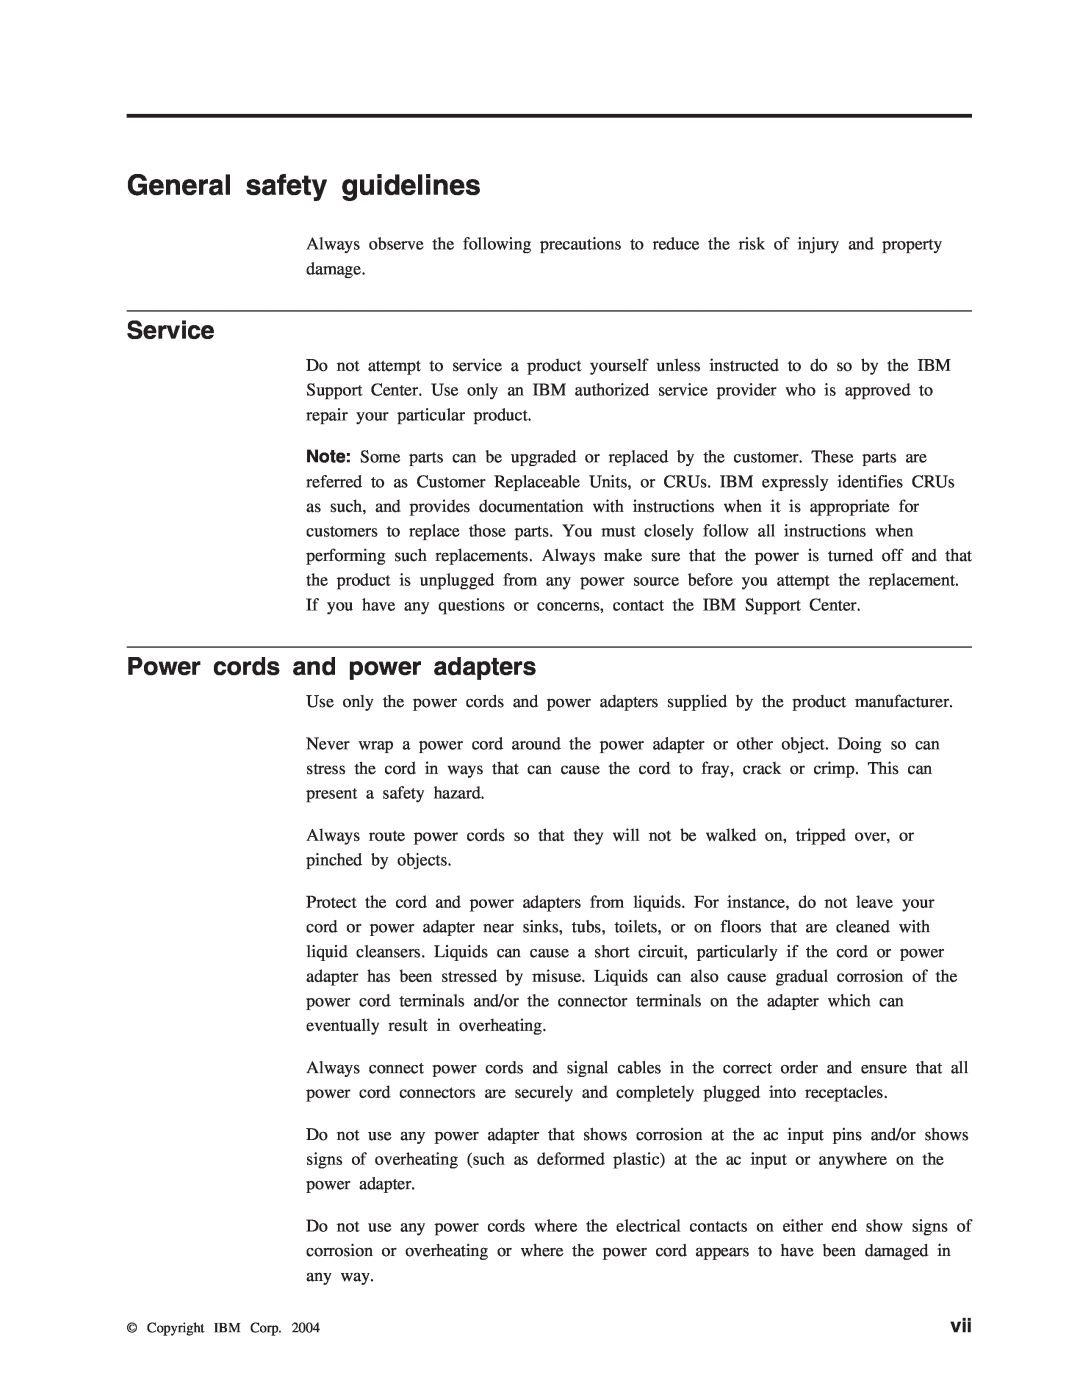 IBM M400 manual General safety guidelines, Service, Power cords and power adapters 